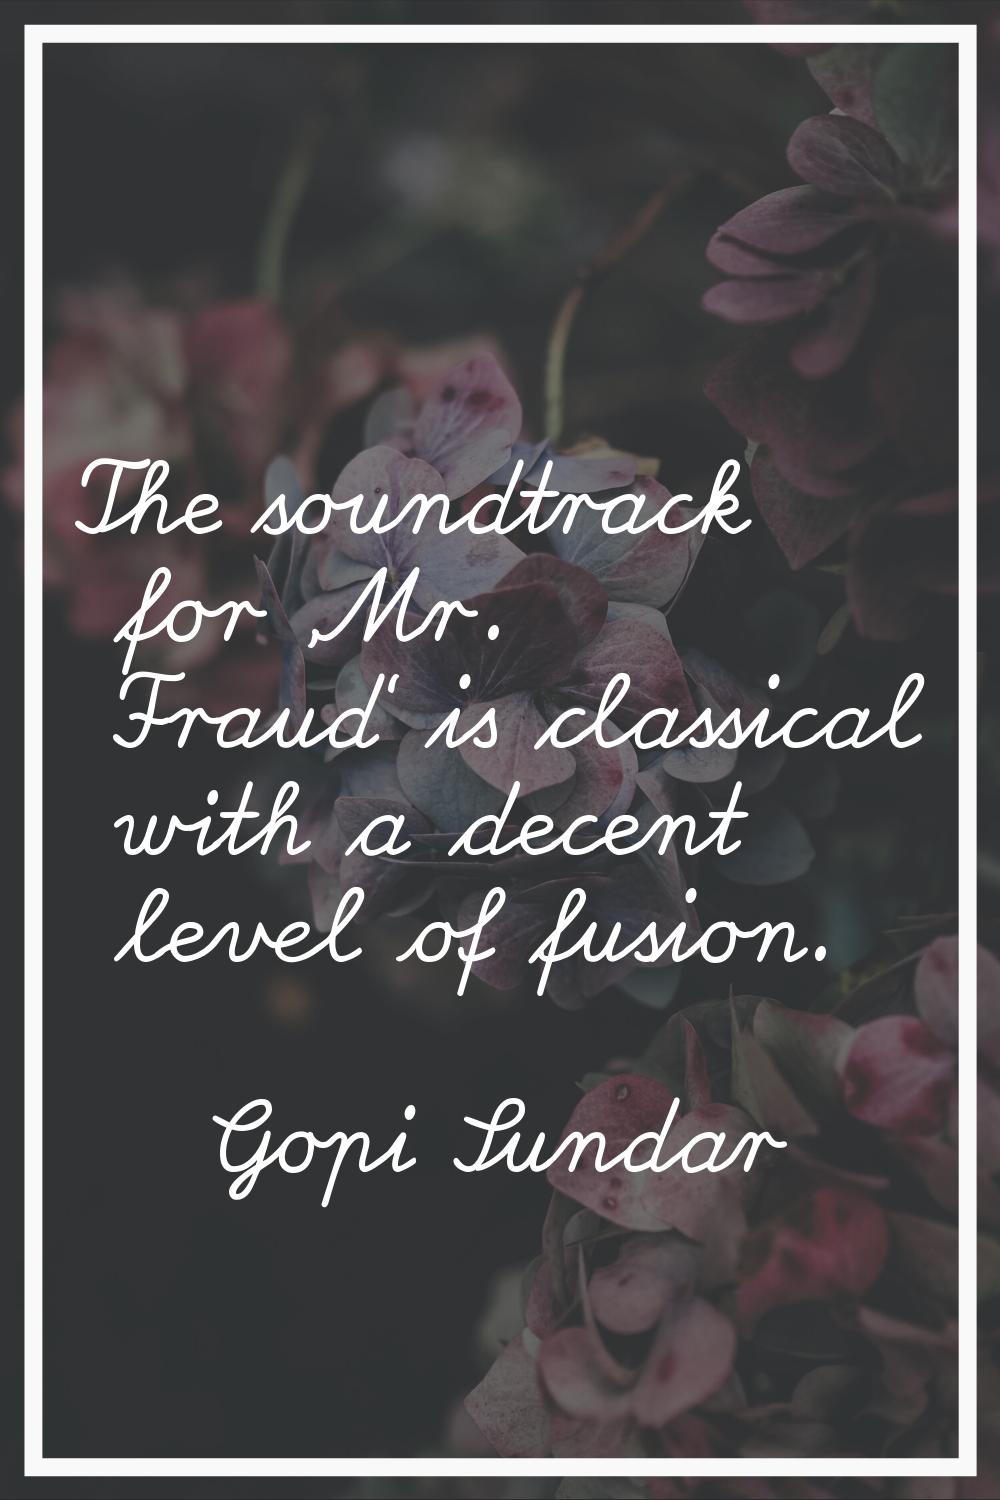 The soundtrack for 'Mr. Fraud' is classical with a decent level of fusion.